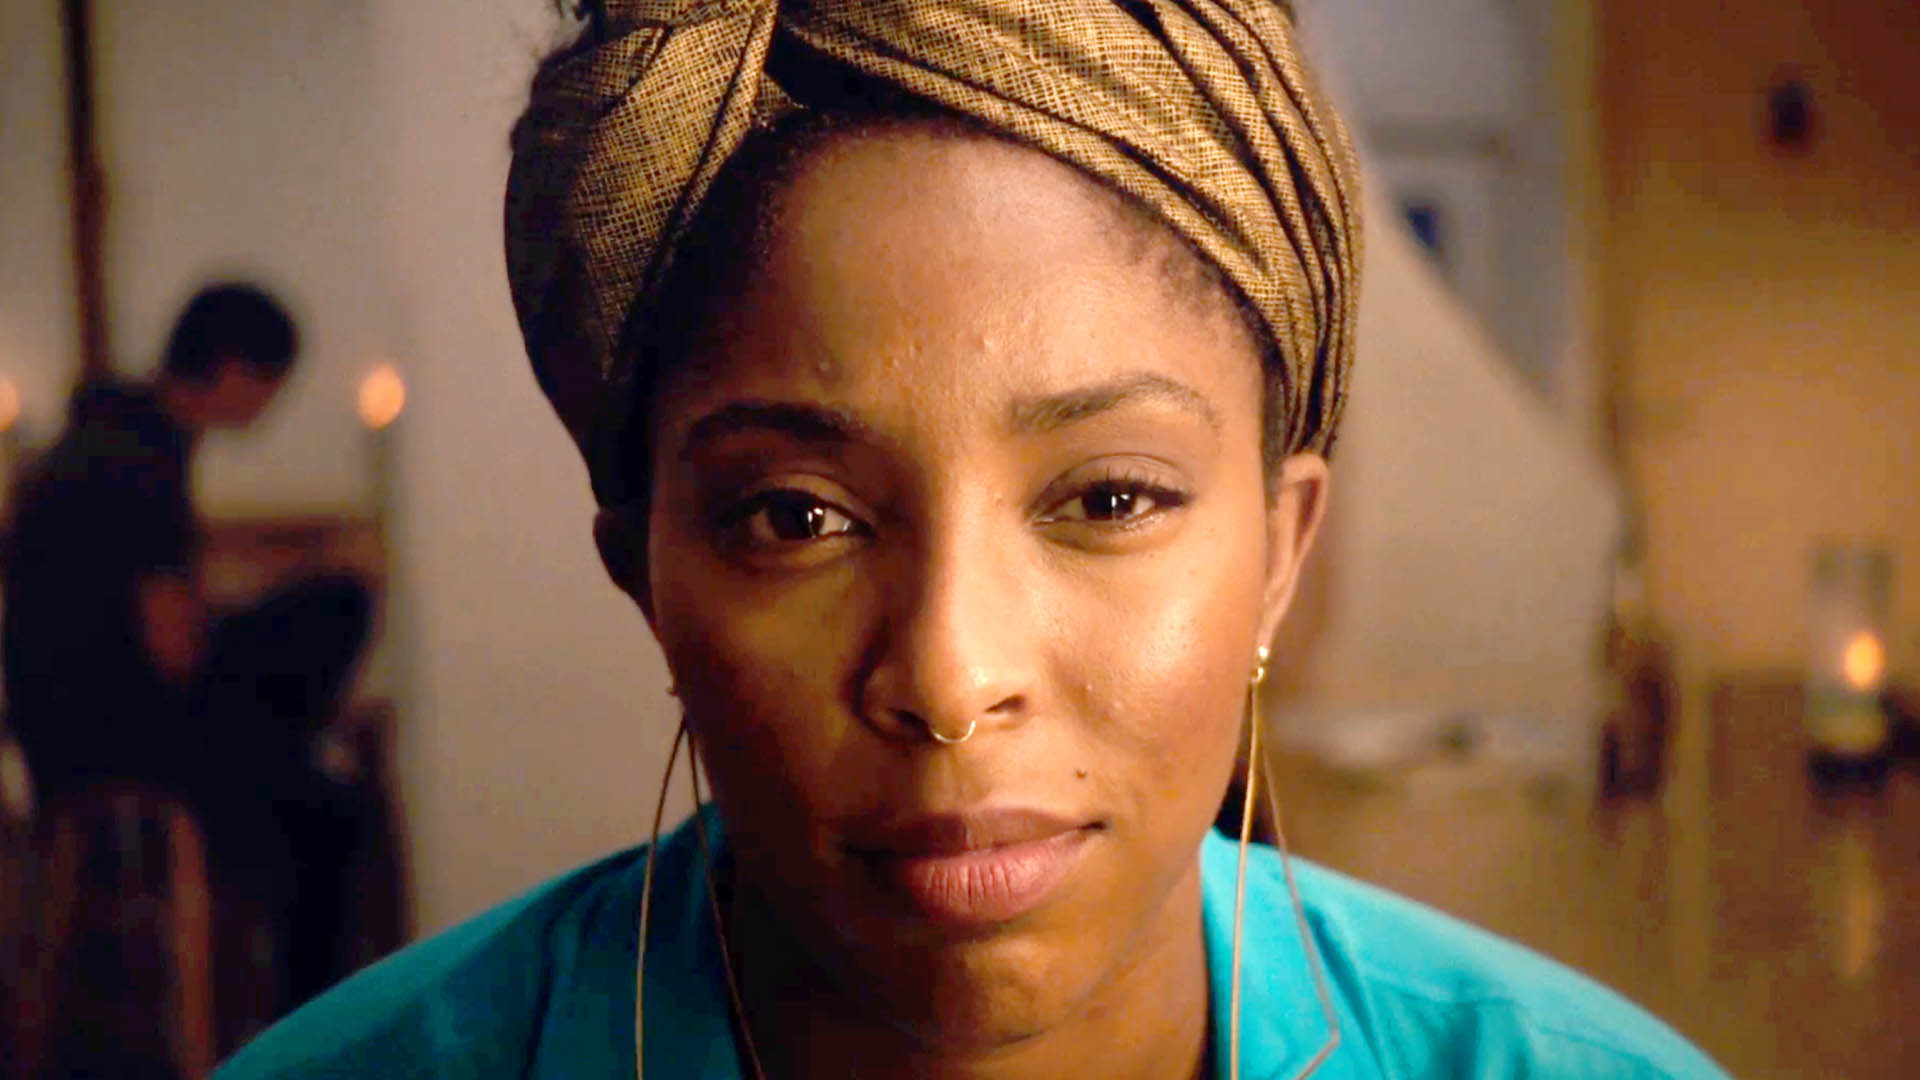 Jessica James, played by Jessica Williams in The Incredible Jessica James